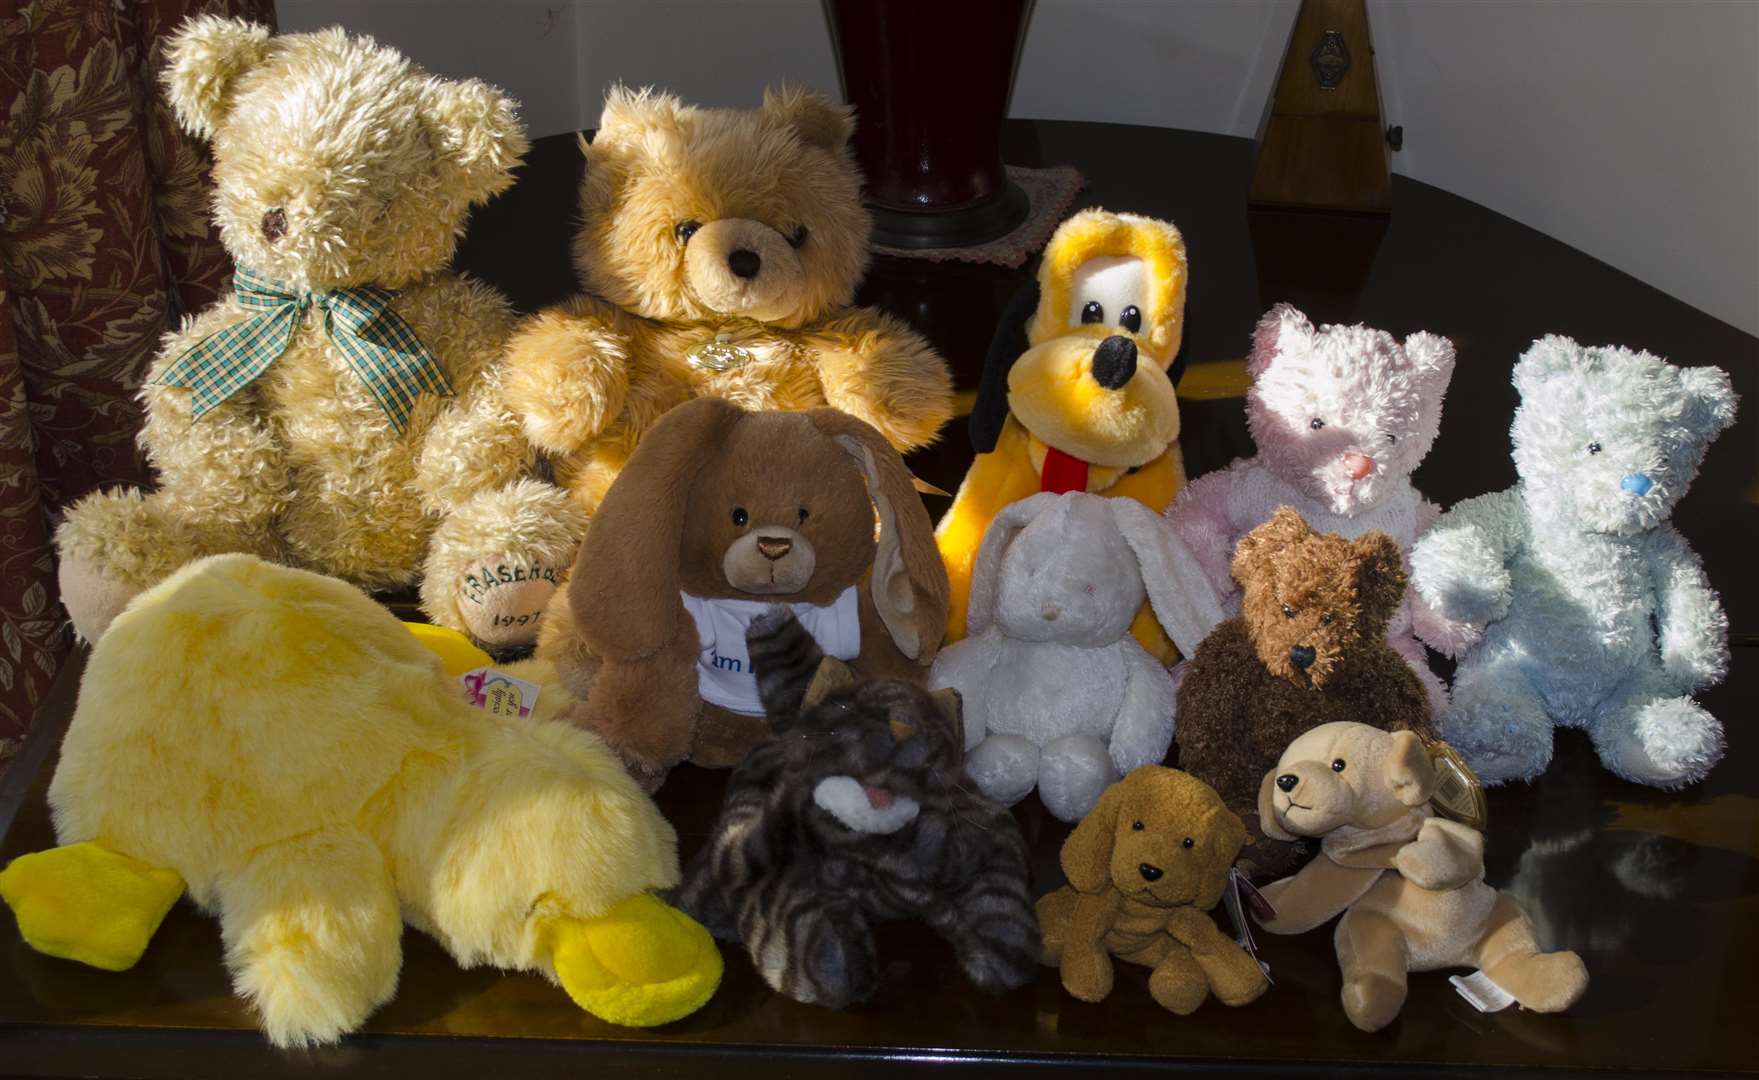 A group of teddies will also be coming along for the journey